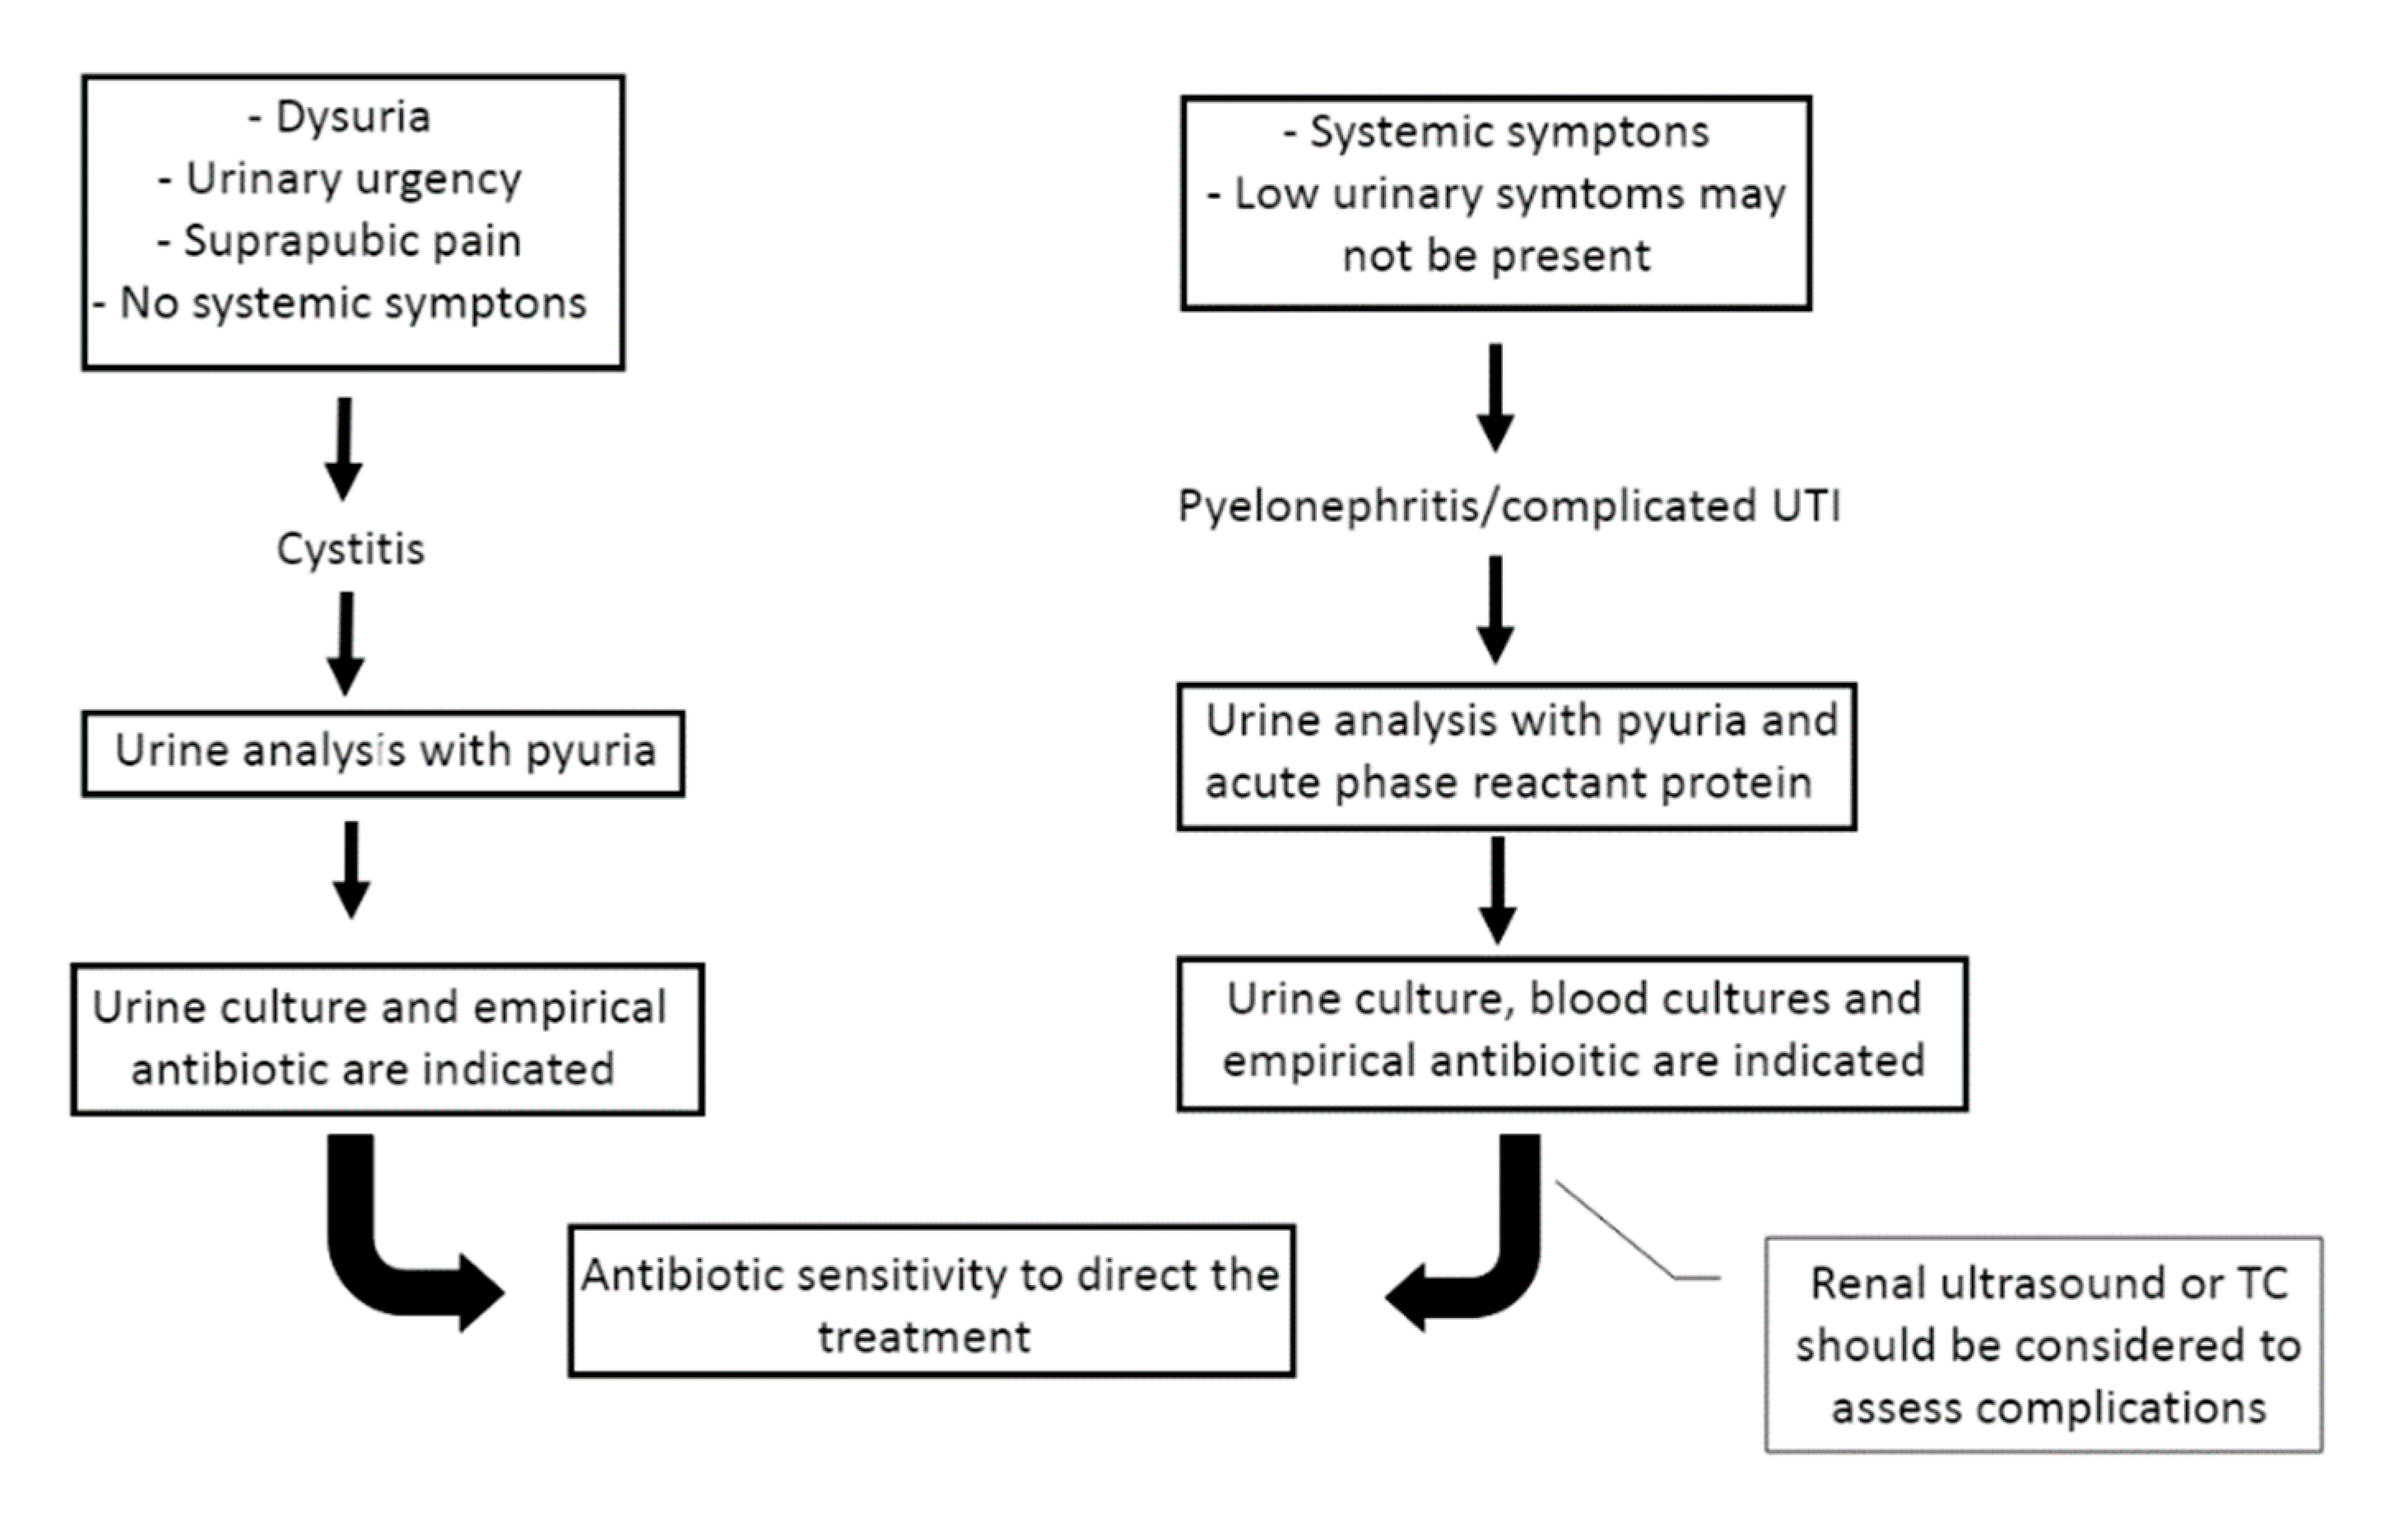 urinary tract infection pathophysiology diagram